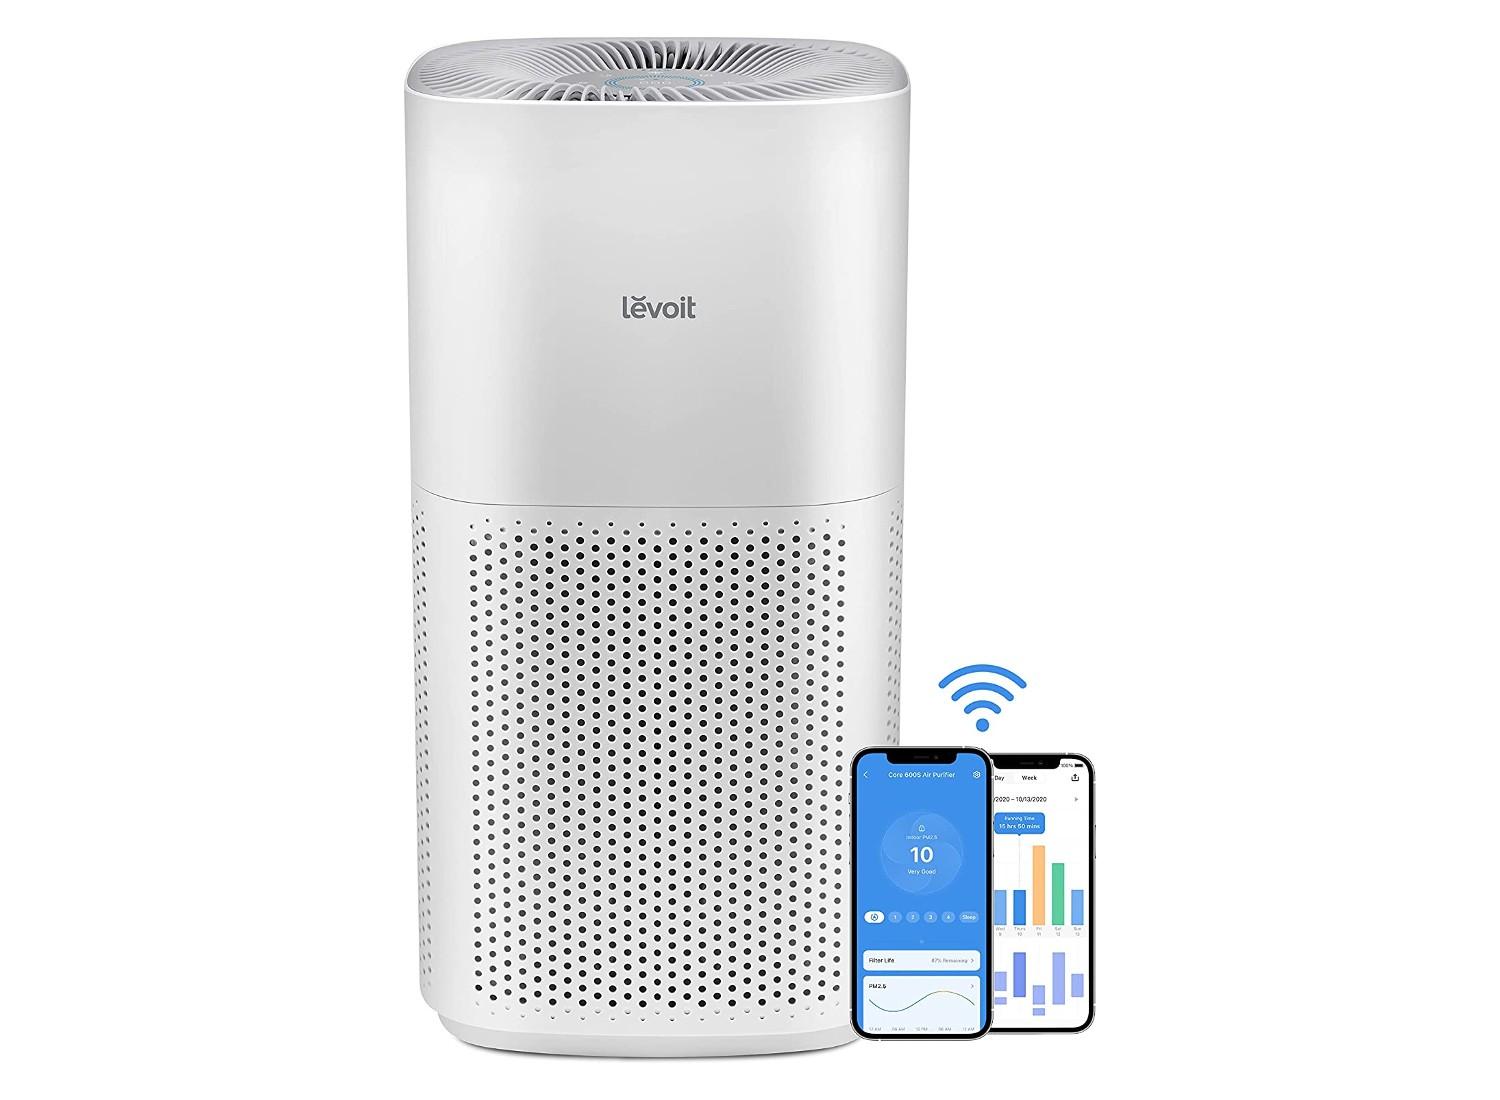 A Levoit air purifier and a phone on a white background.